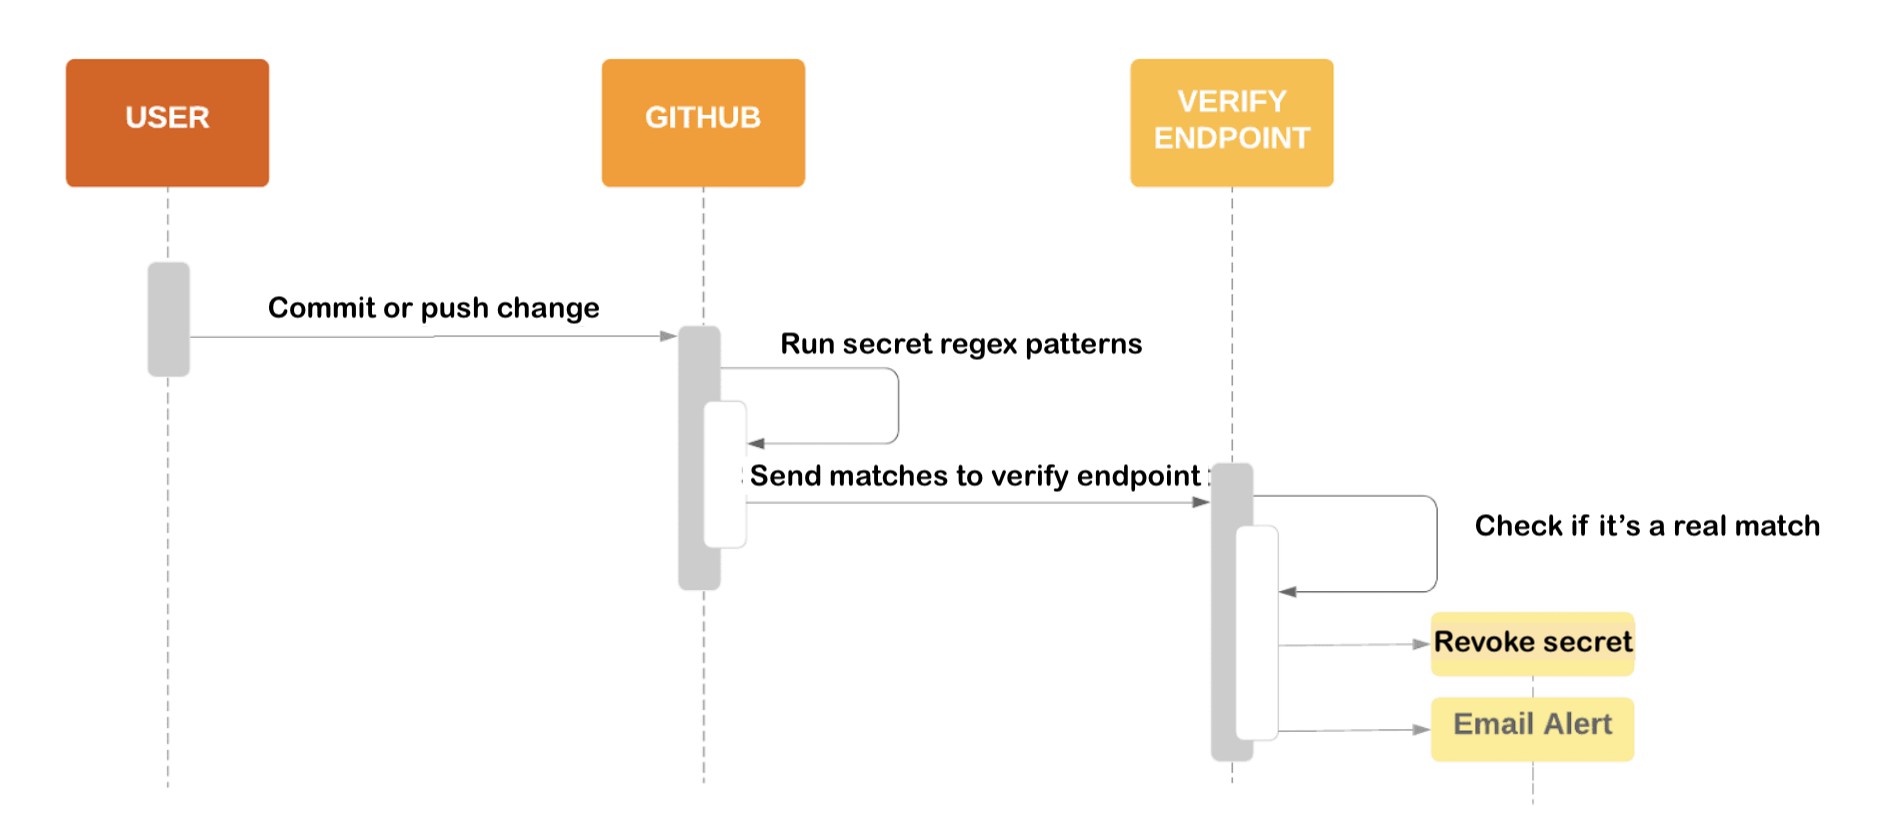 Diagram showing the process of scanning for a secret and sending matches to a service provider's verify endpoint.